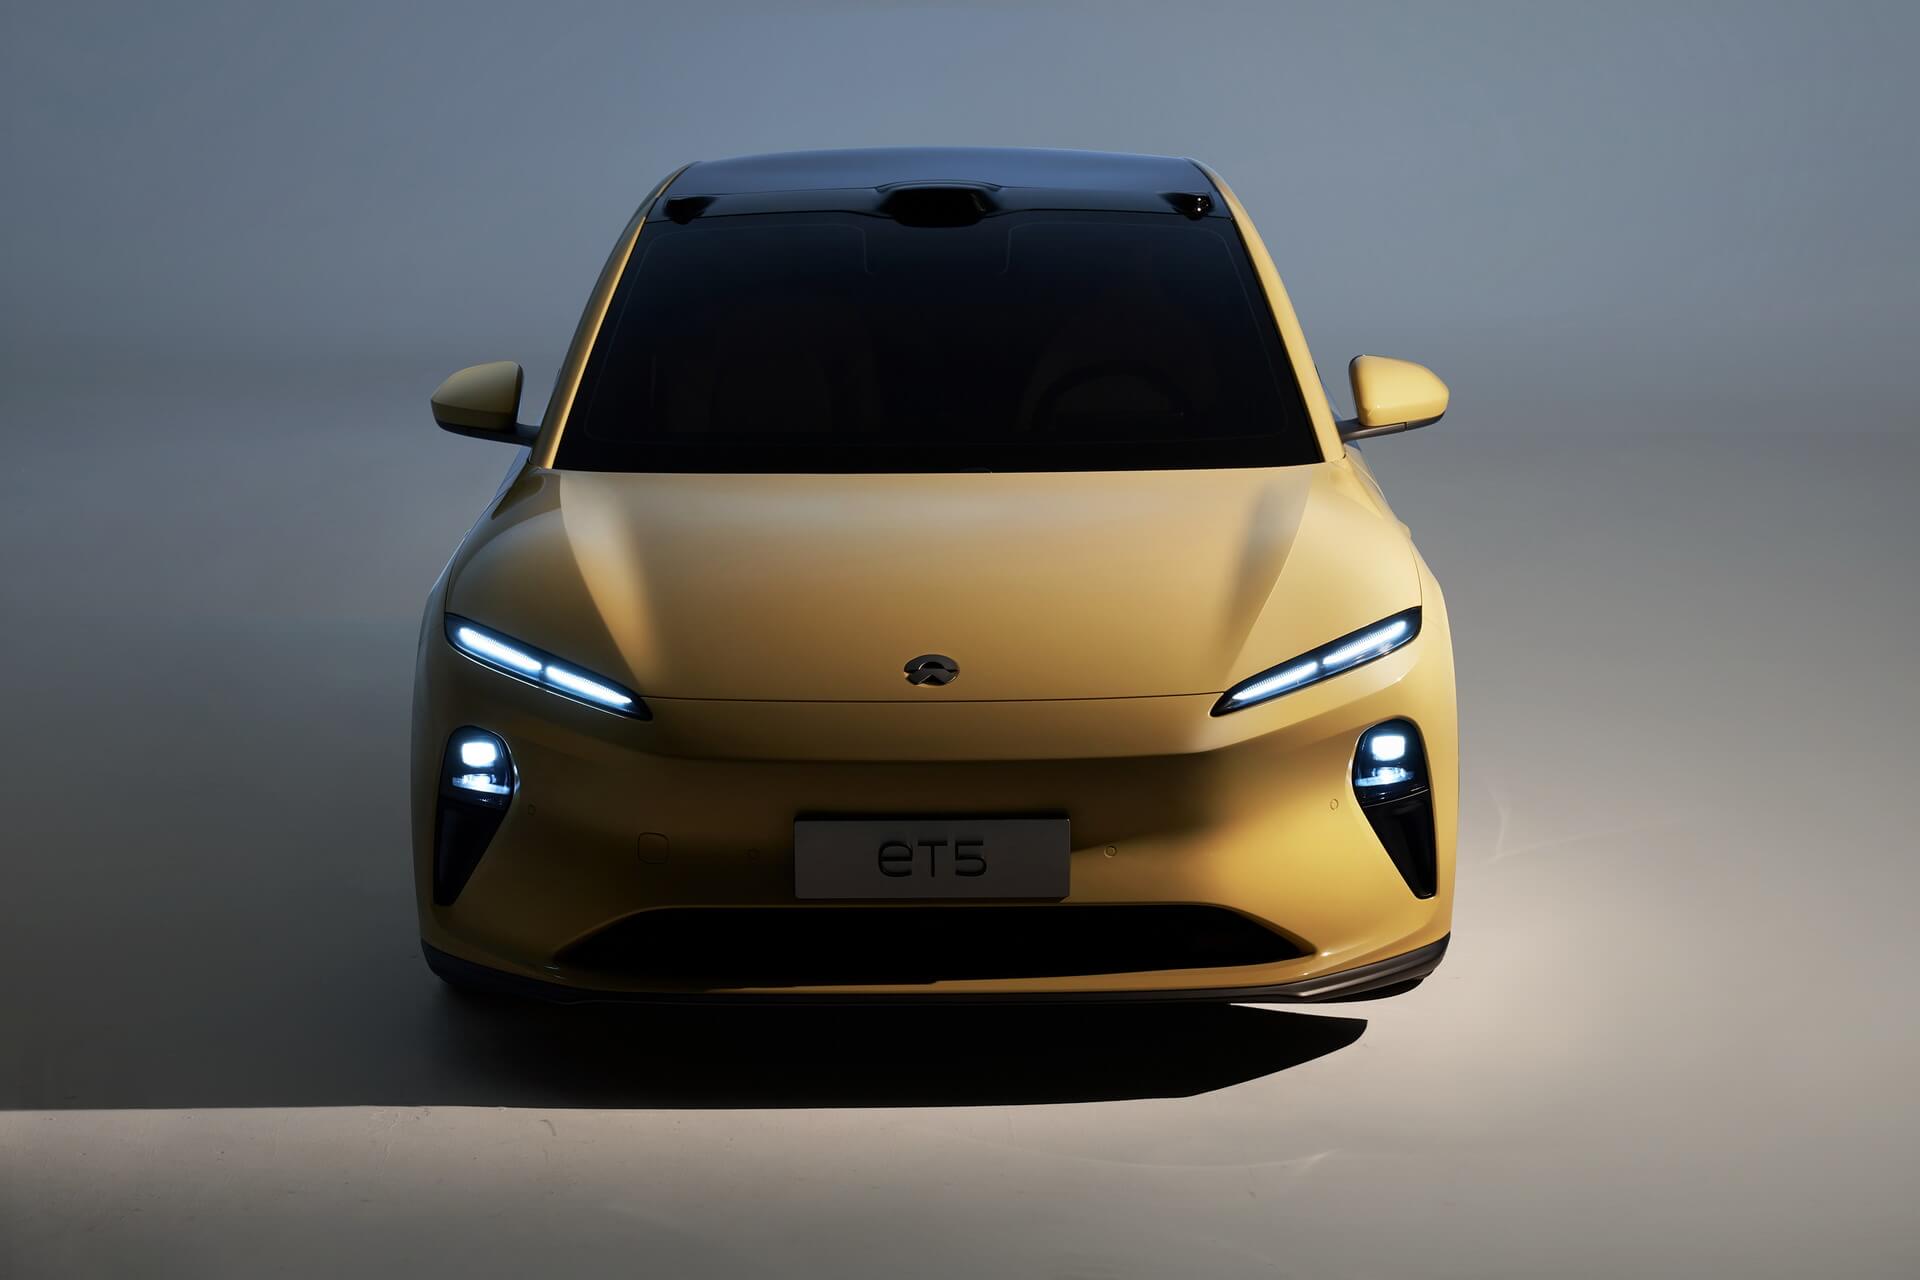  Tesla Model 3 competitor Nio ET5 all-electric sedan unveiled in the Electric Market.